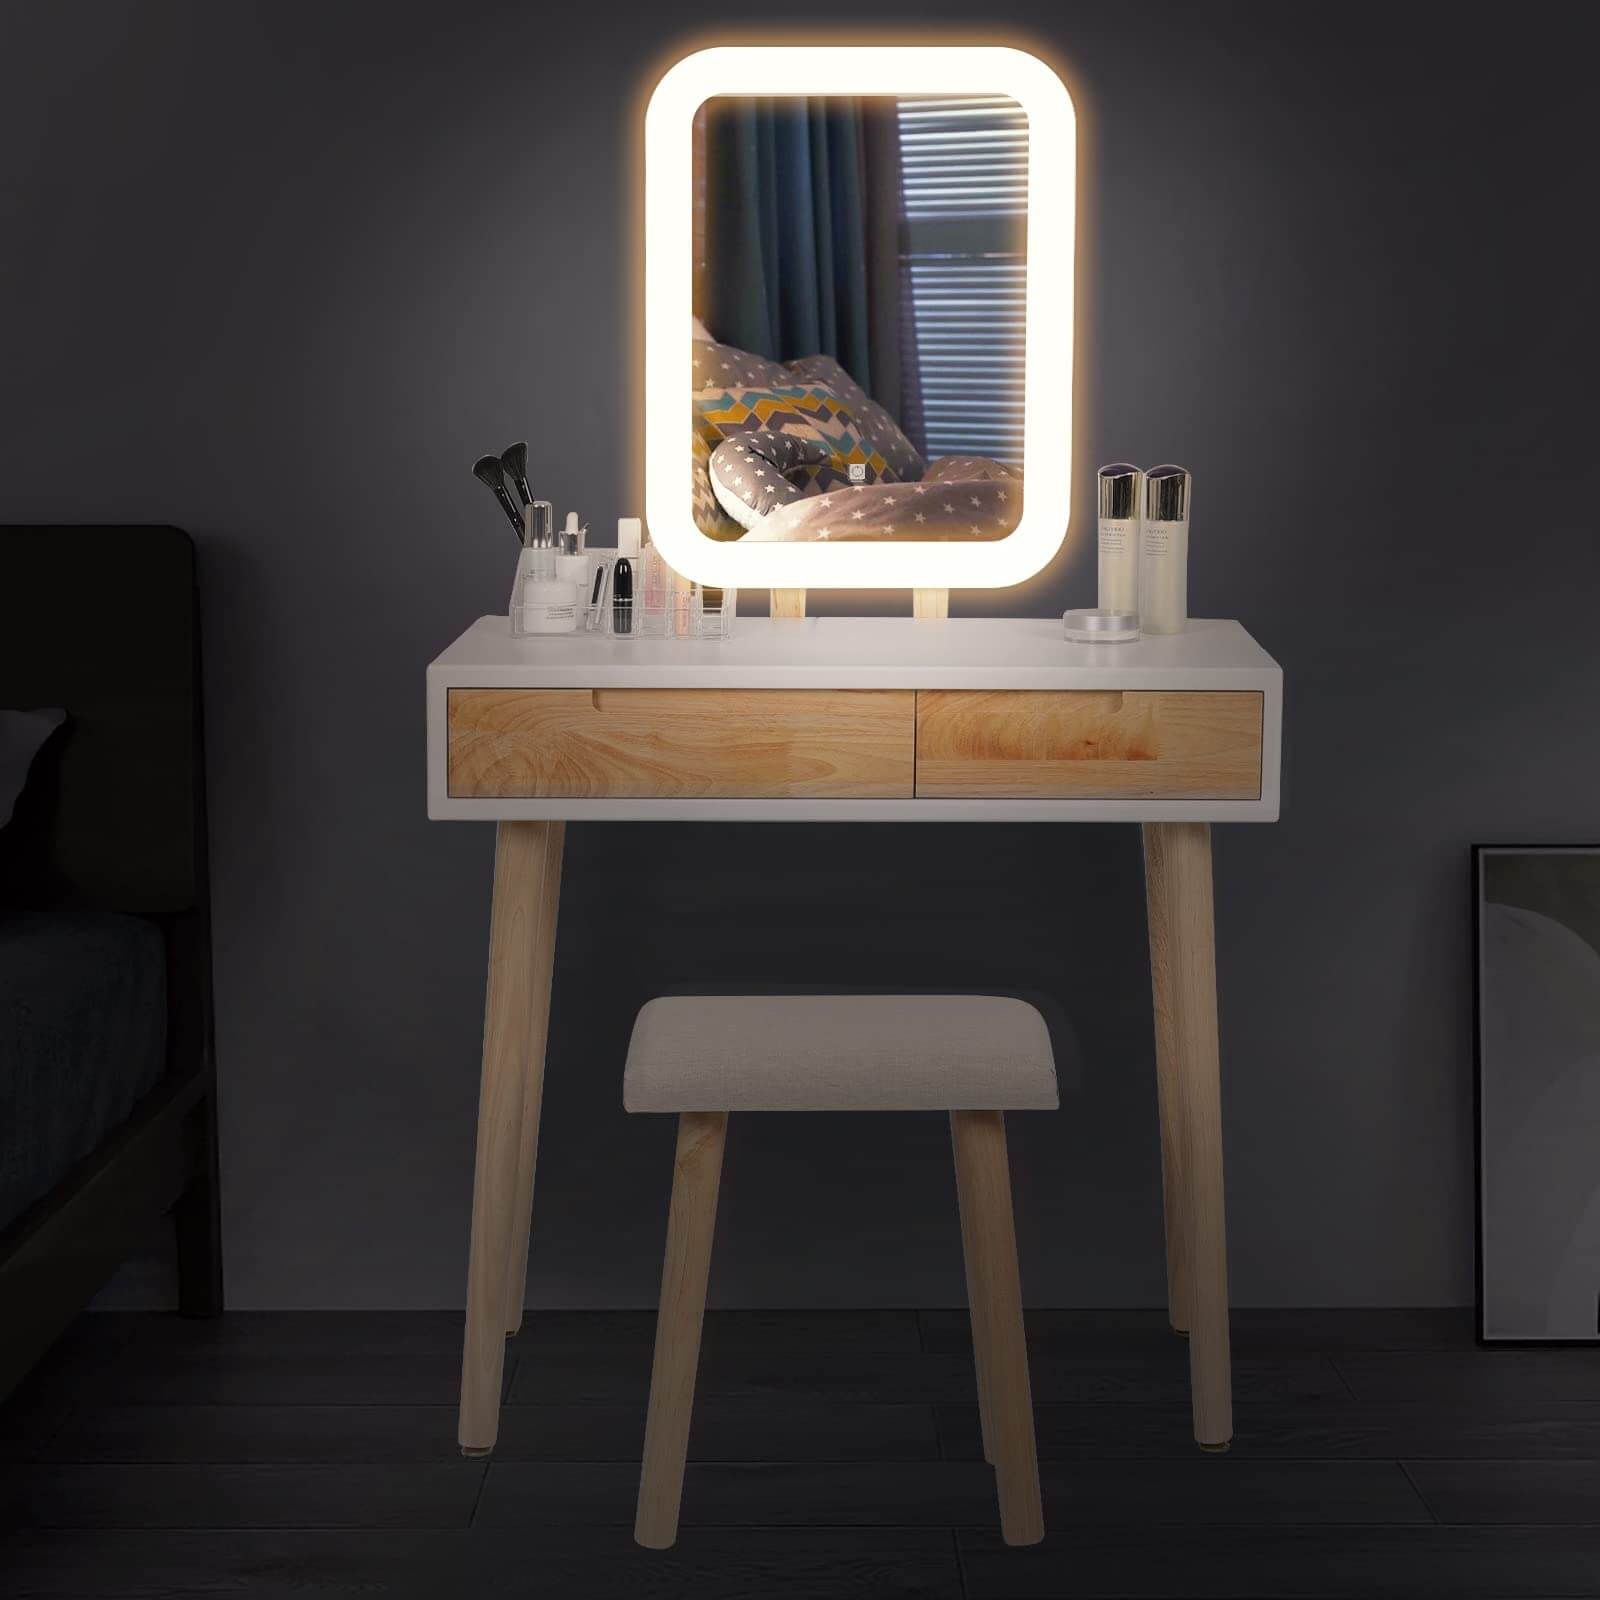 Bright display of Elecwish Vanity Makeup Table Set with Adjustable LED Square Mirror IF113